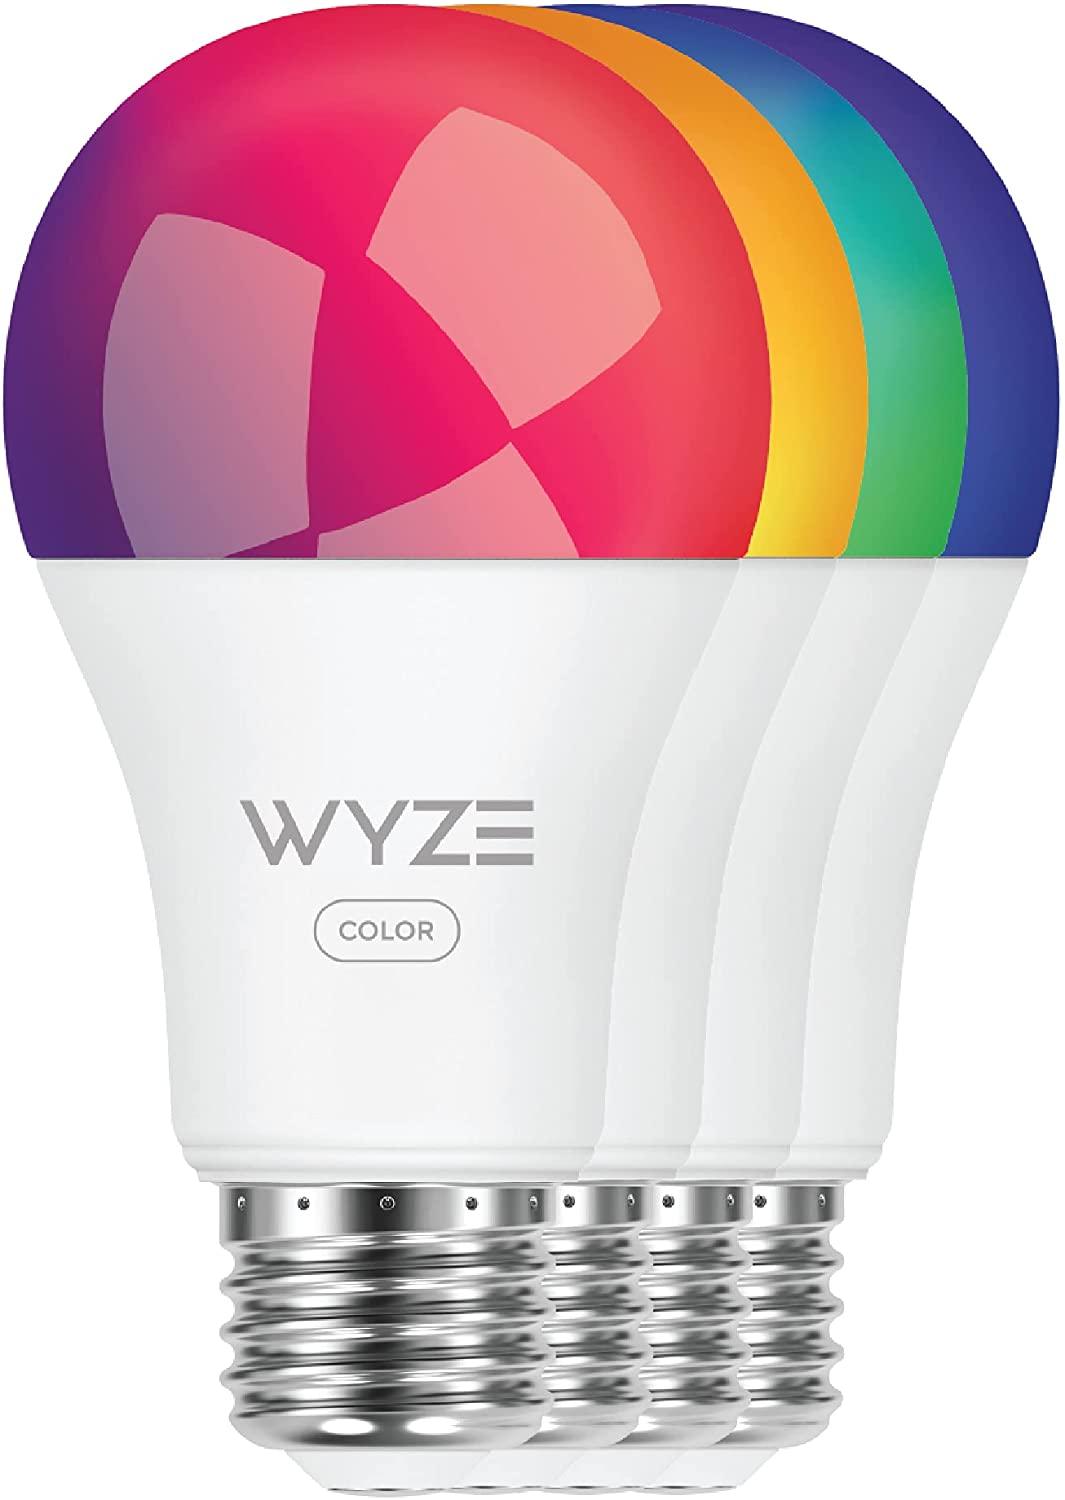 Wyze’s product parade continues with a smart switch and tunable white bulb 